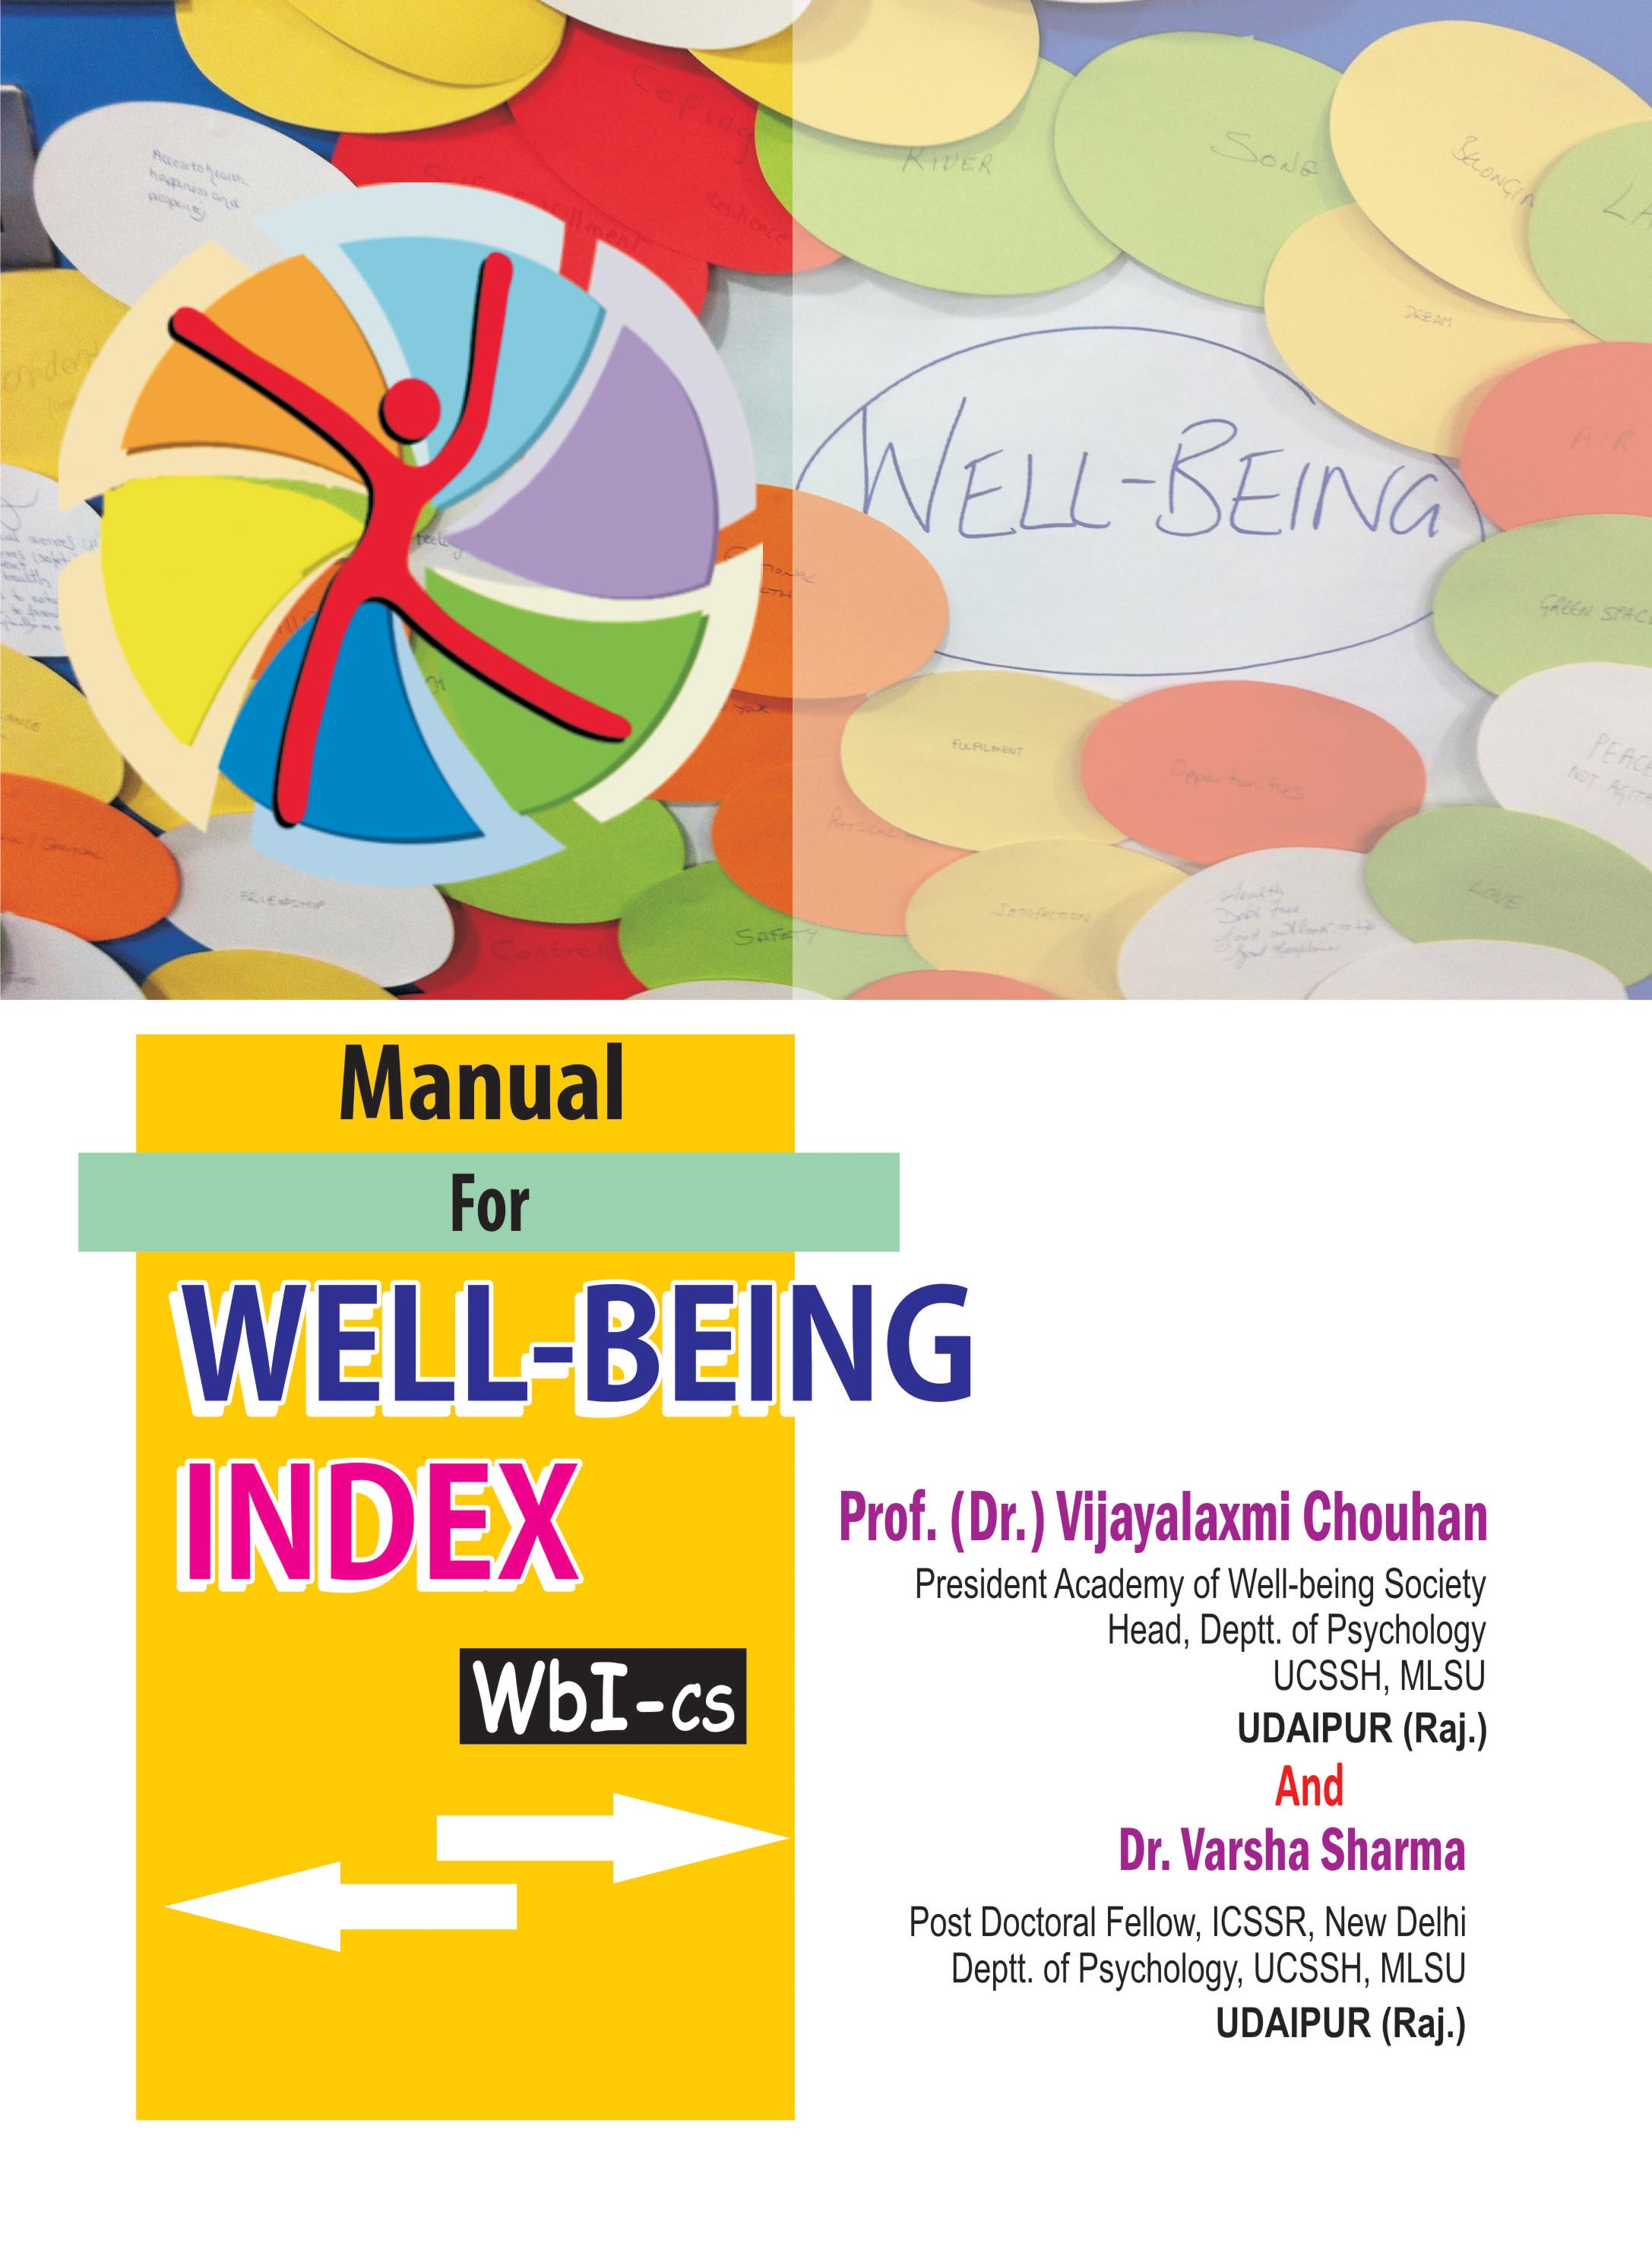 WELL-BEING-INDEX